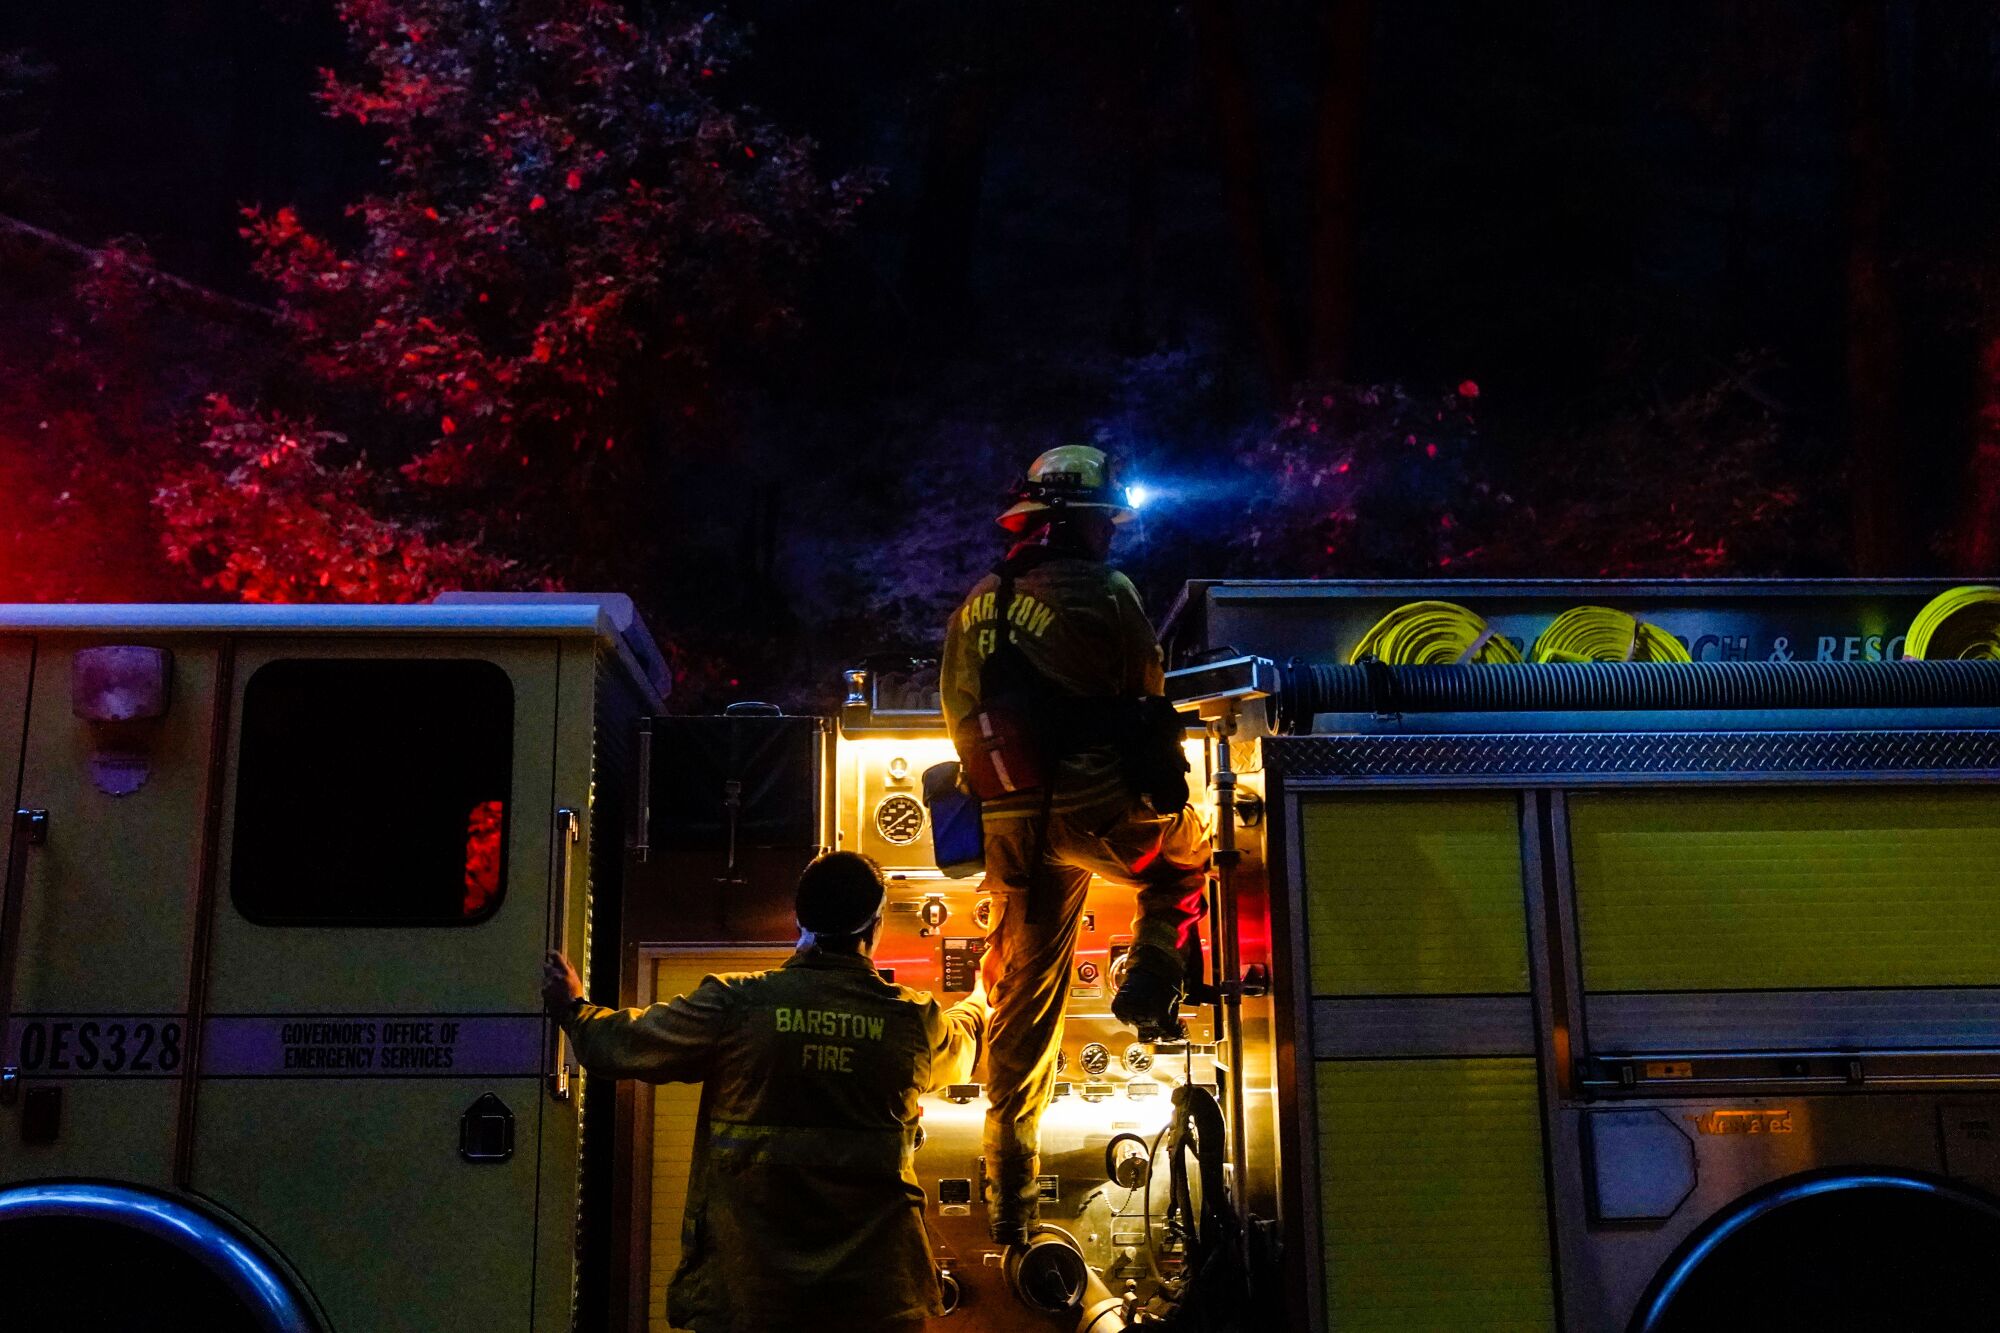 Firefighters on a firetruck at night